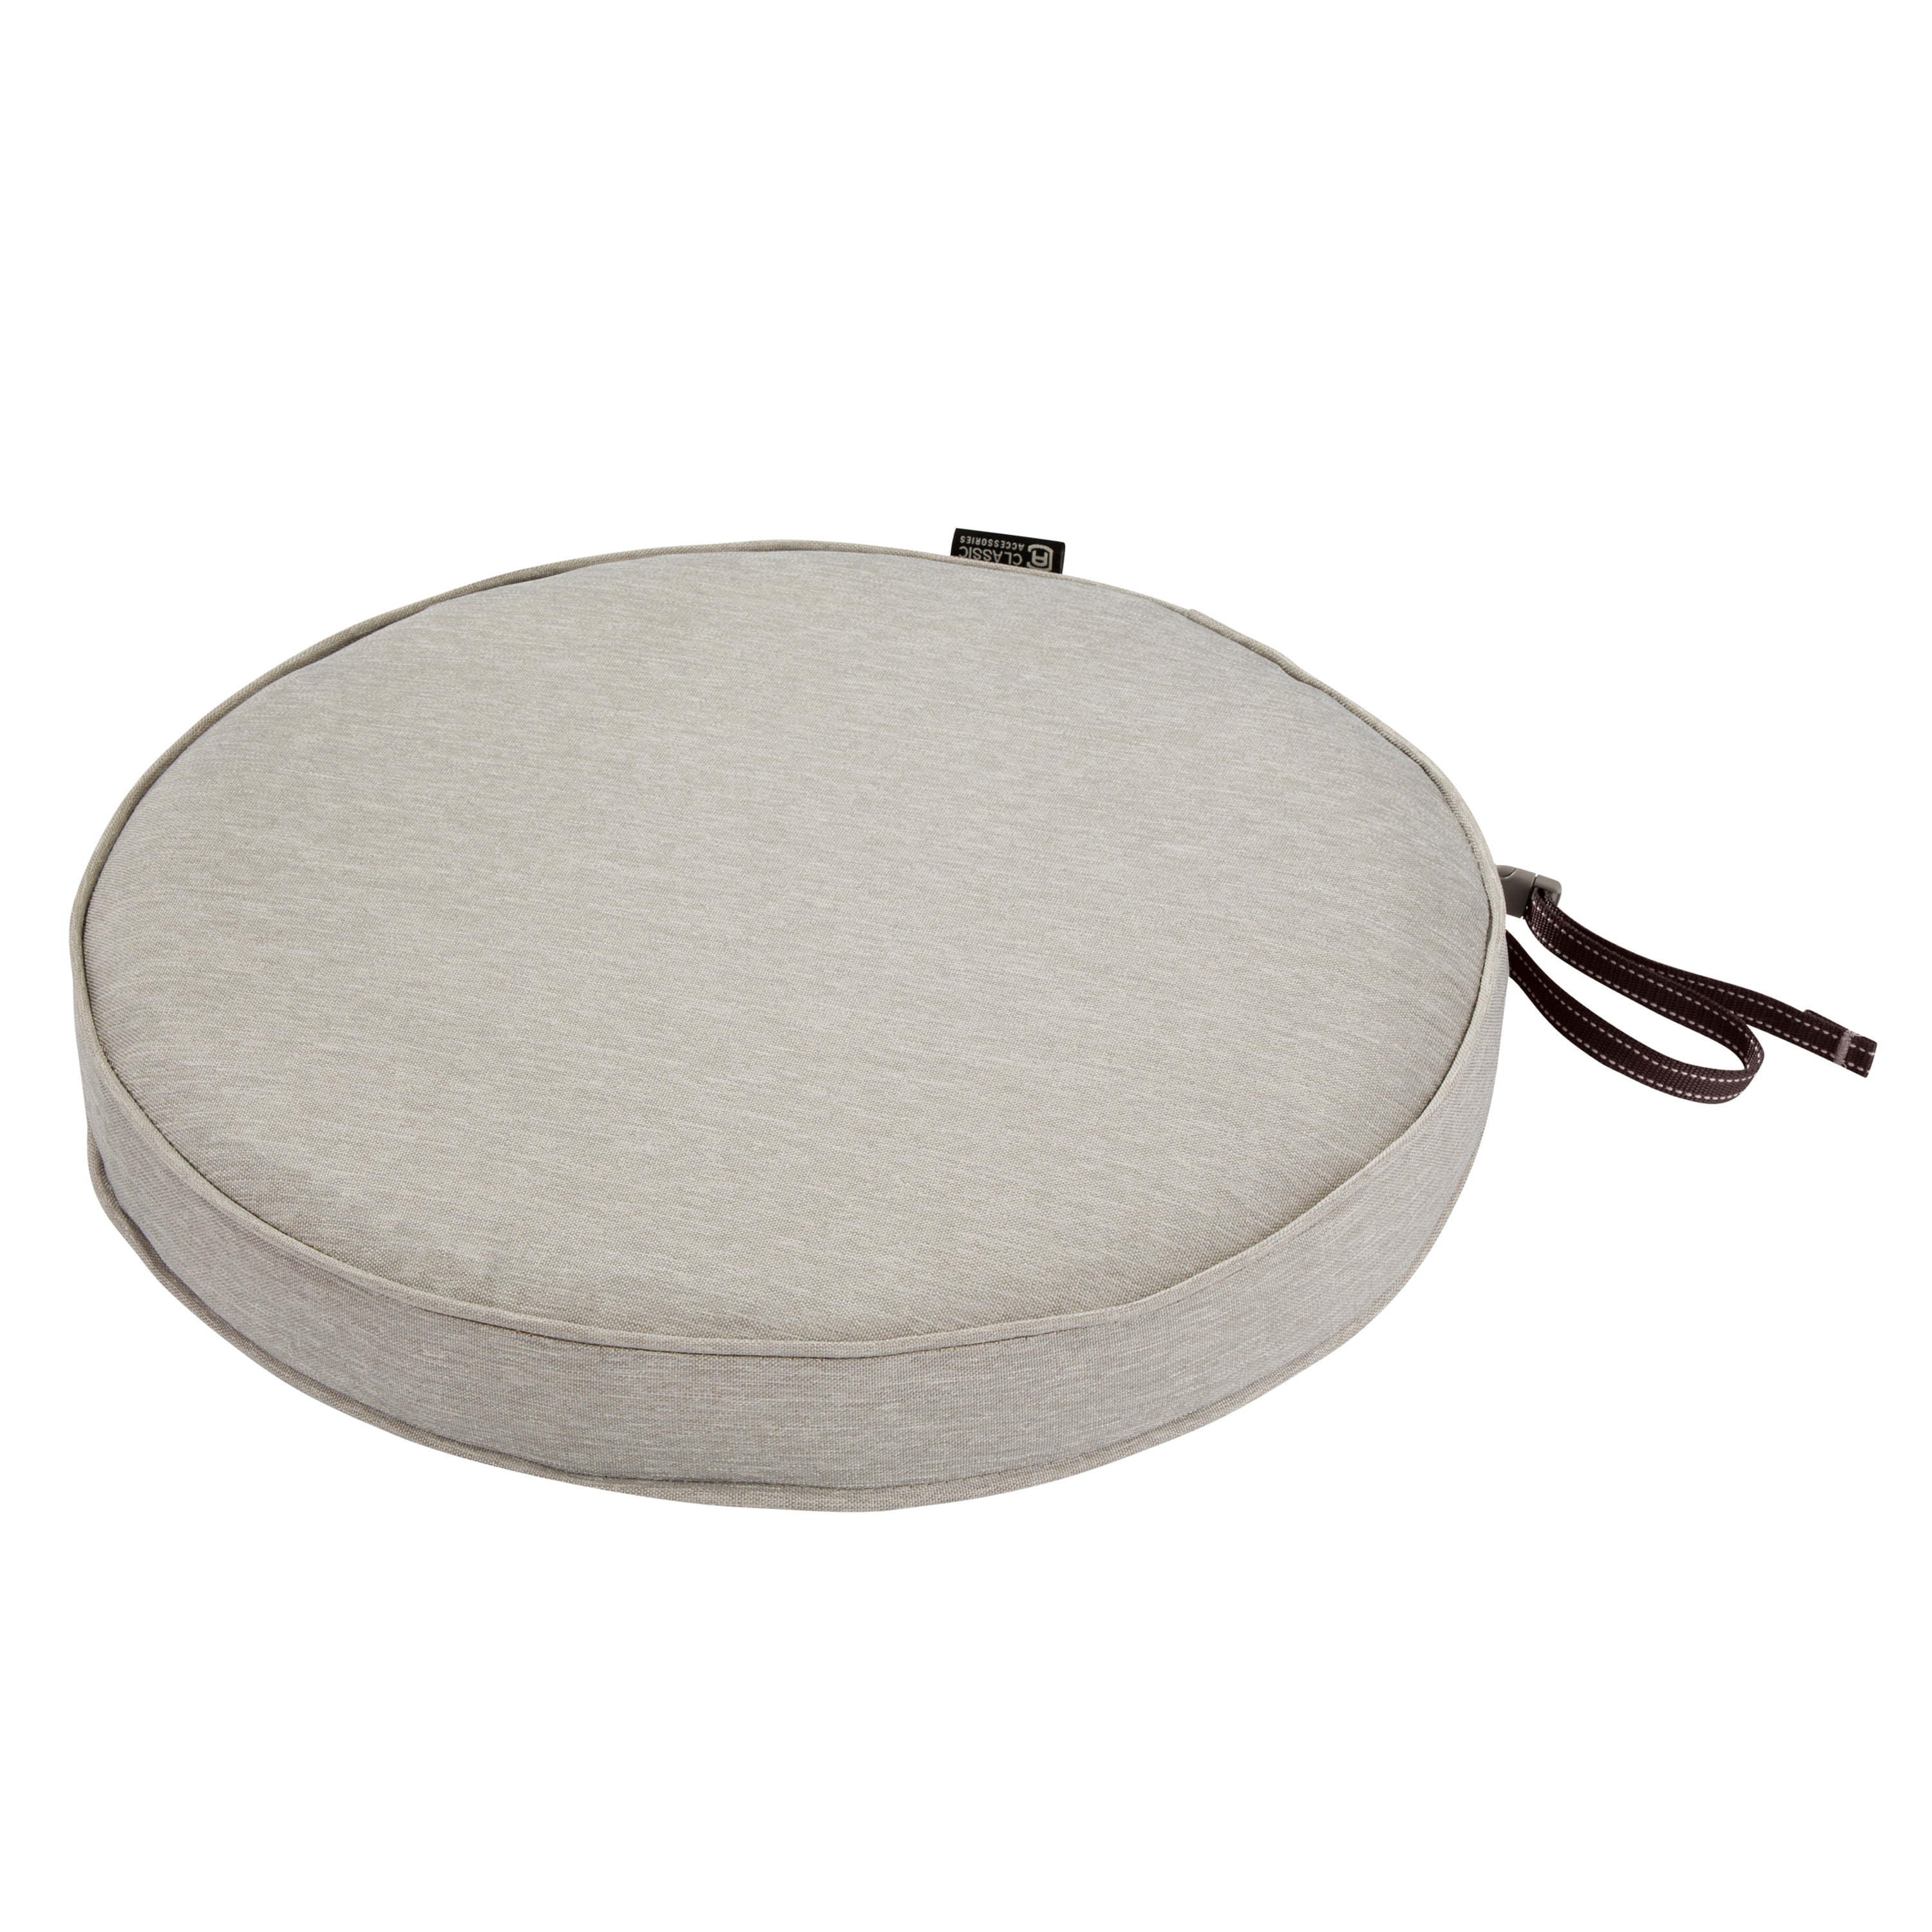 Picture of Classic Accessories 62-003-HGREY-EC Montlake FadeSafe Round Patio Dining Seat Cushion, Heather Grey